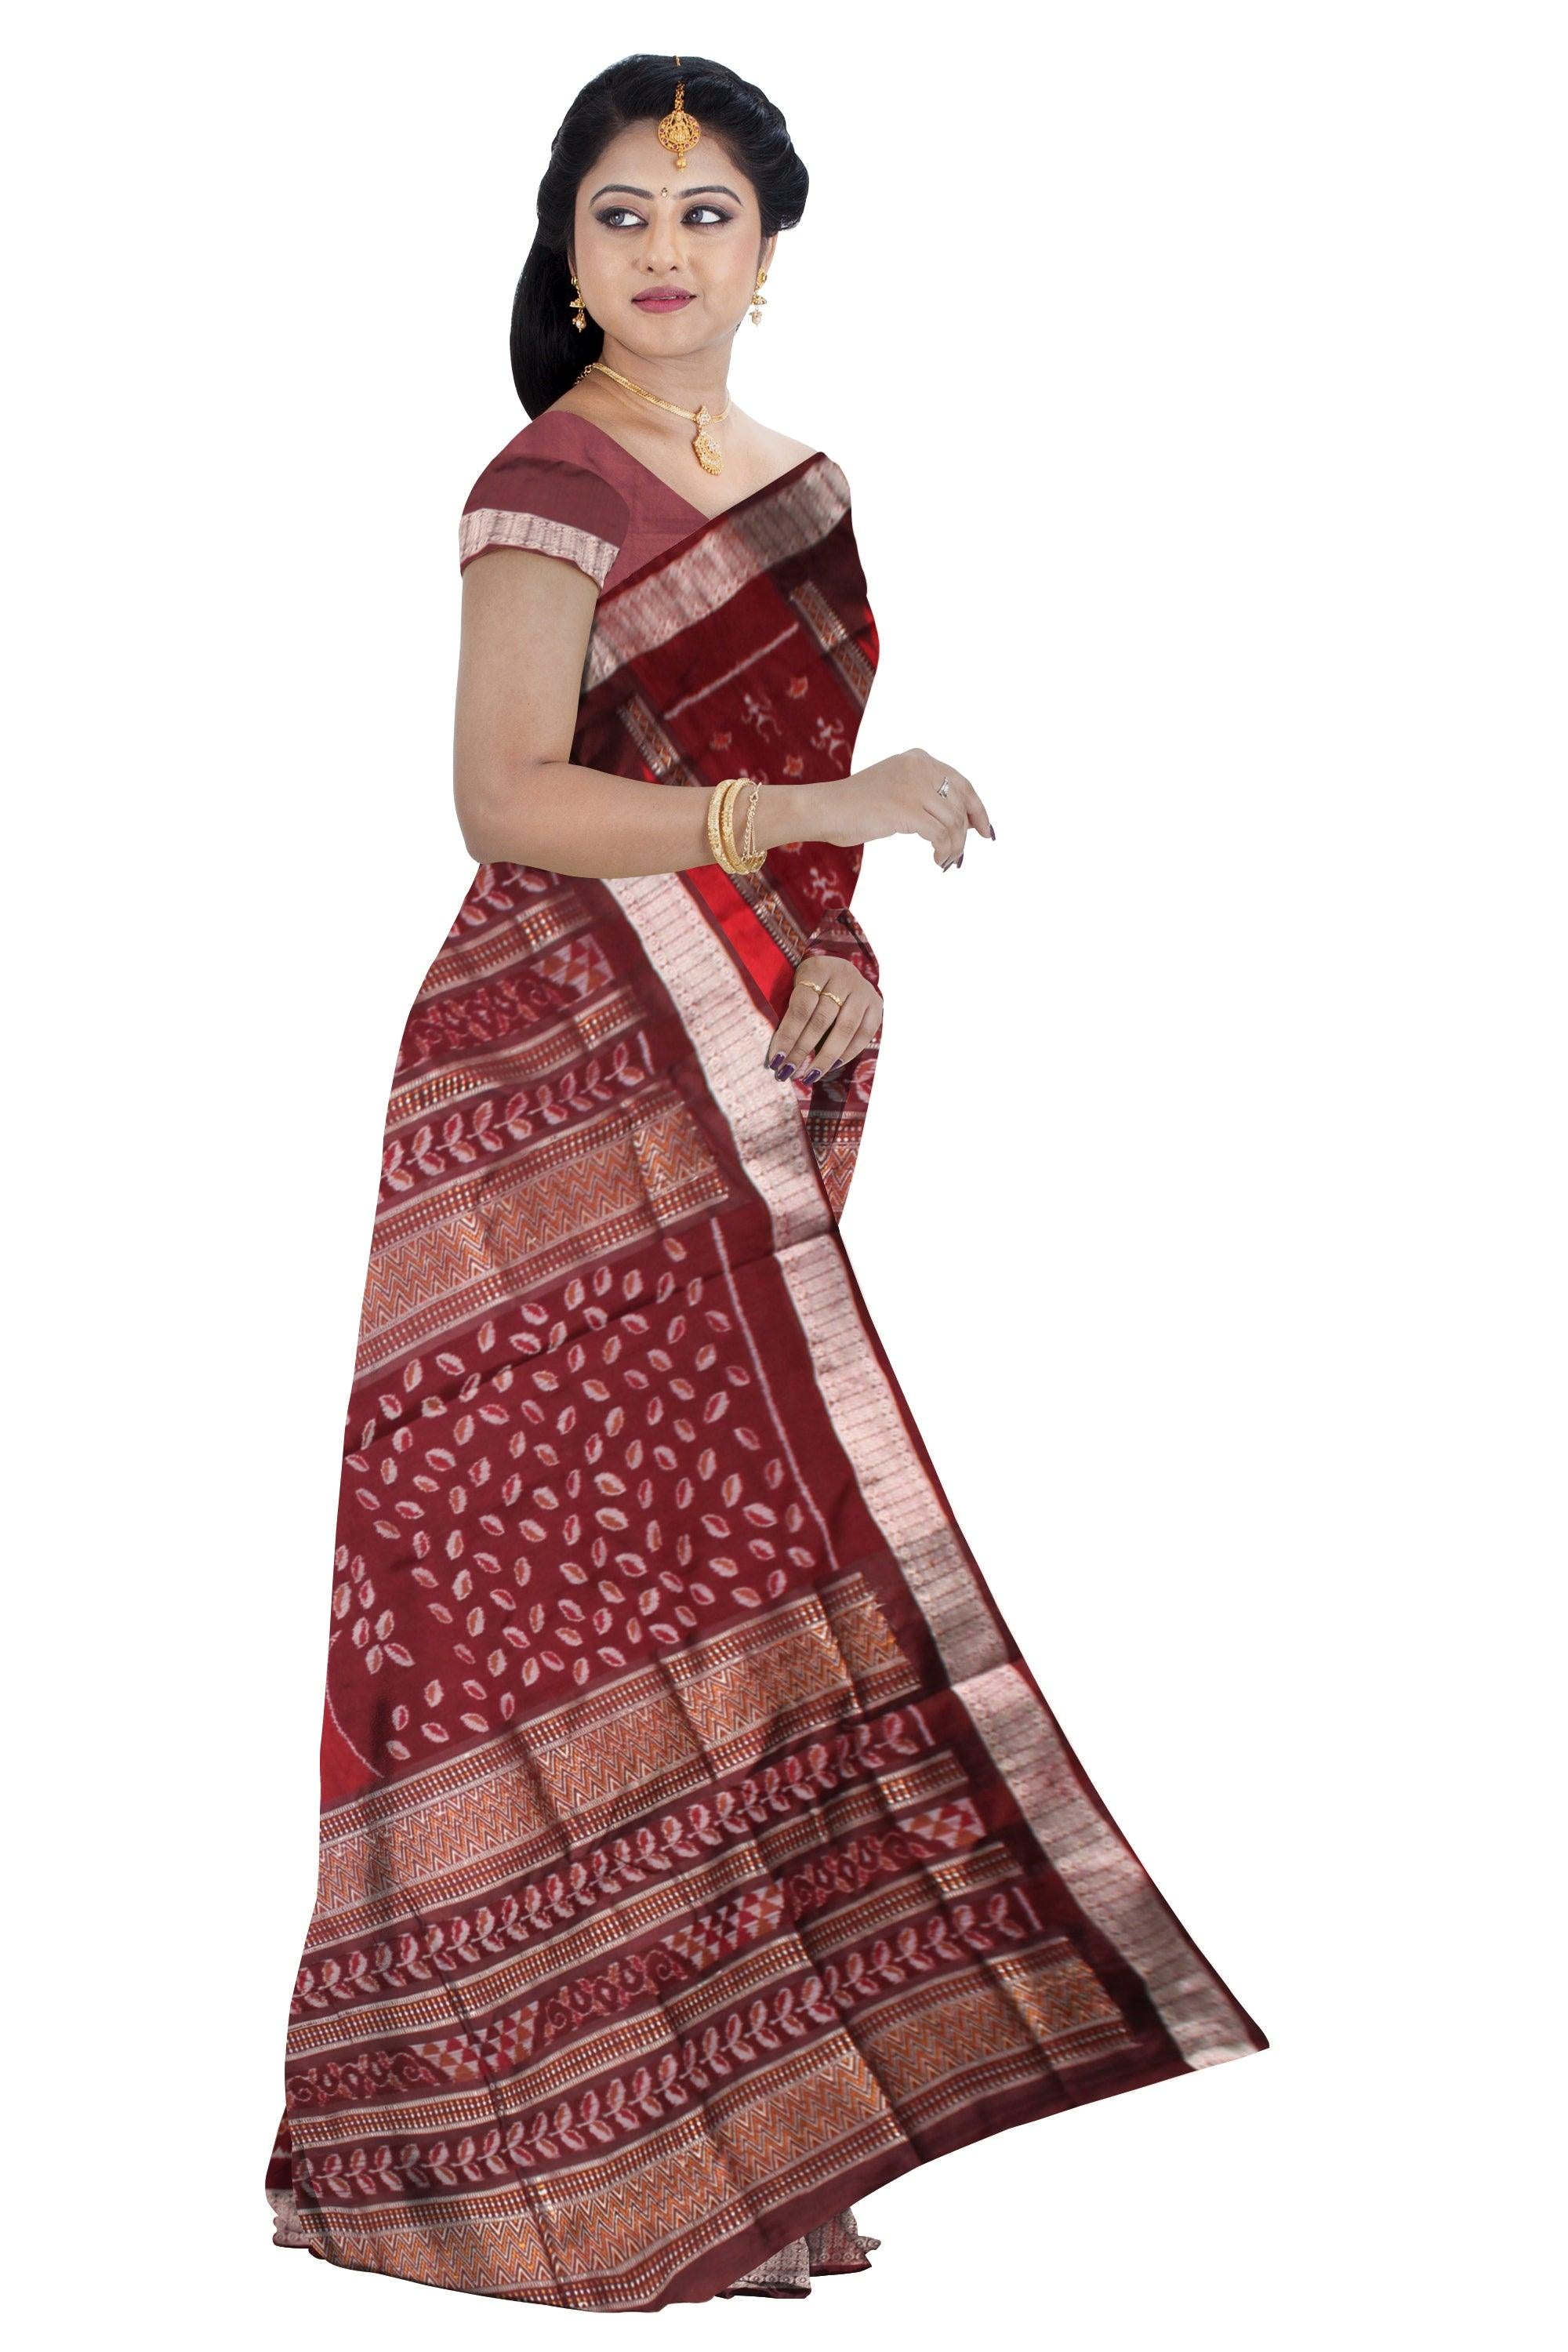 LATEST TREE AND TERRACOTTA PATTERN BOMKEI PATA SAREE IN MAROON AND COFFEE COLOR BASE, ATTACHED WITH BLOUSE PIECE. - Koshali Arts & Crafts Enterprise